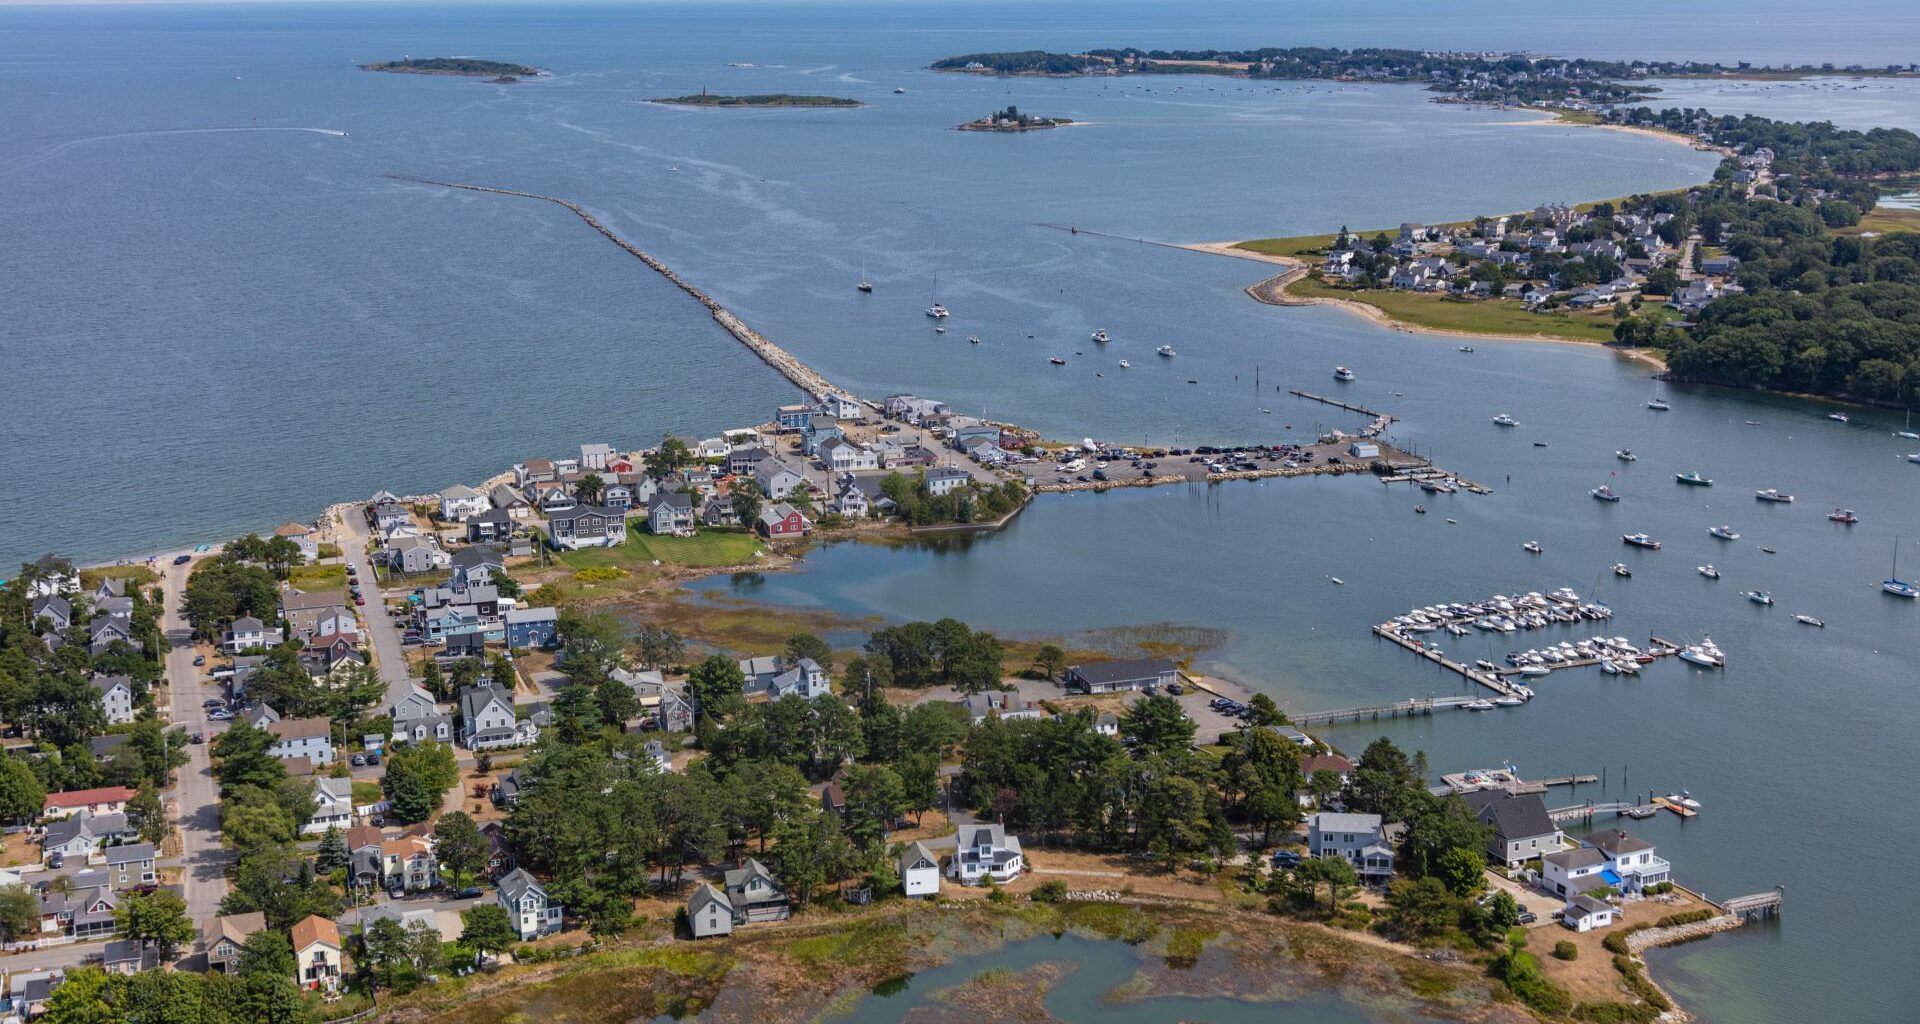 Aerial view of the end of Camp Ellis in Saco and how close homes are to the water